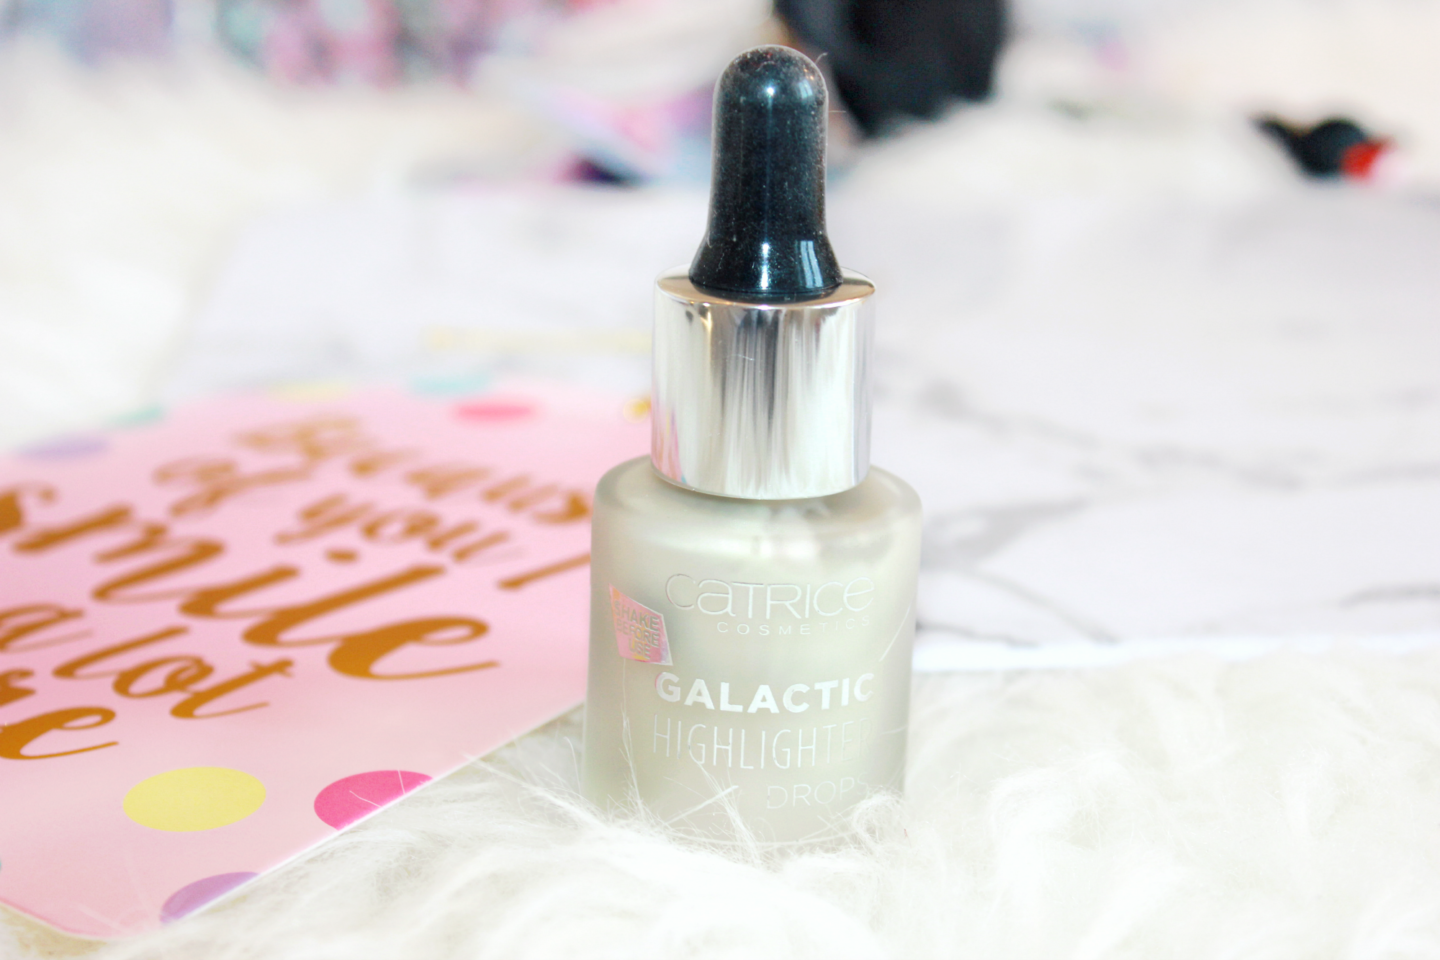 Catrice-Galactic-Highlighter-Drops-Review